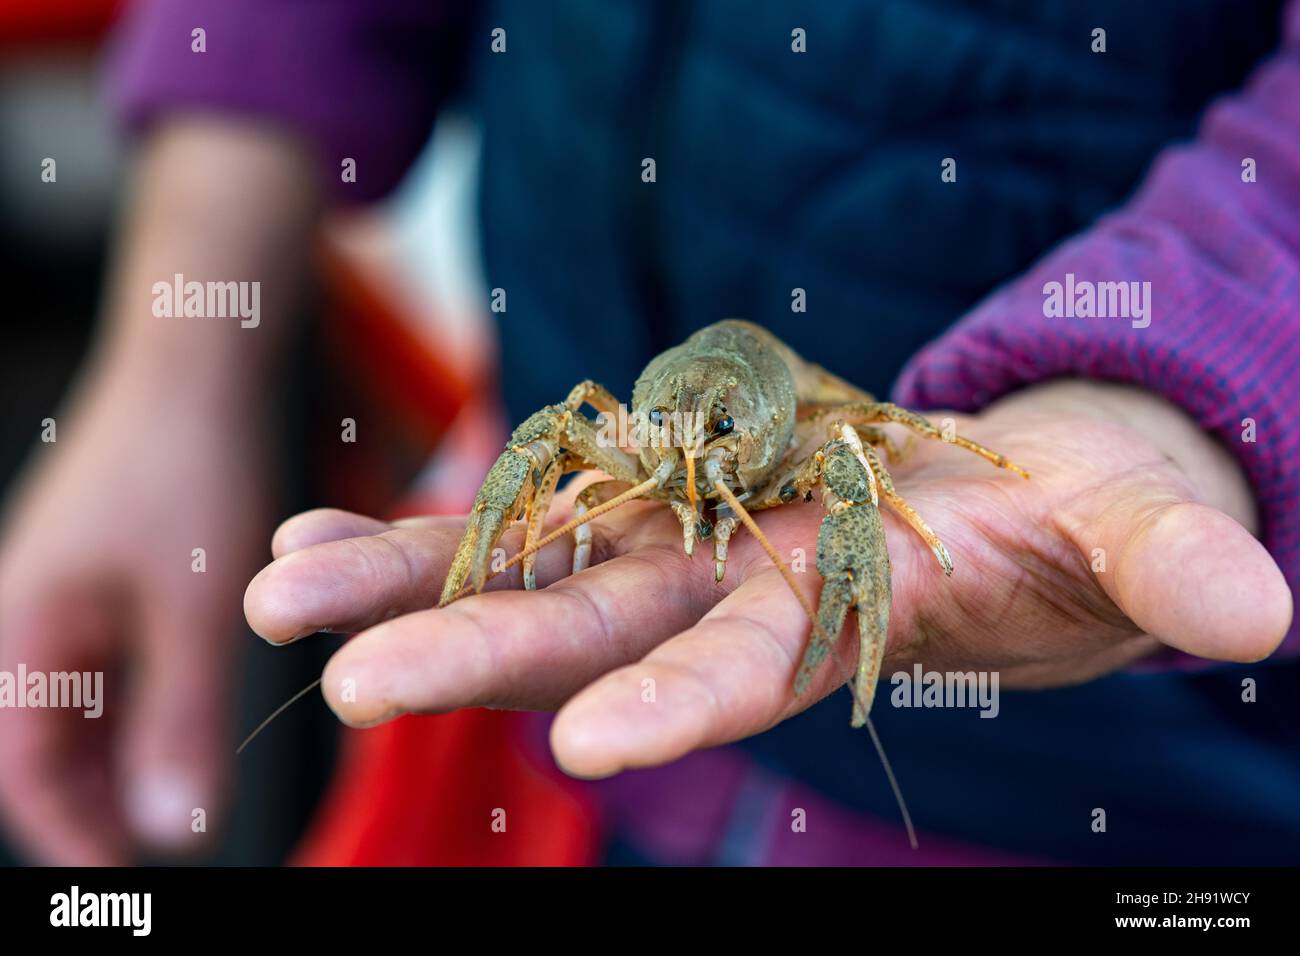 live crayfish on the arm of a fishmonger at a fish market Stock Photo